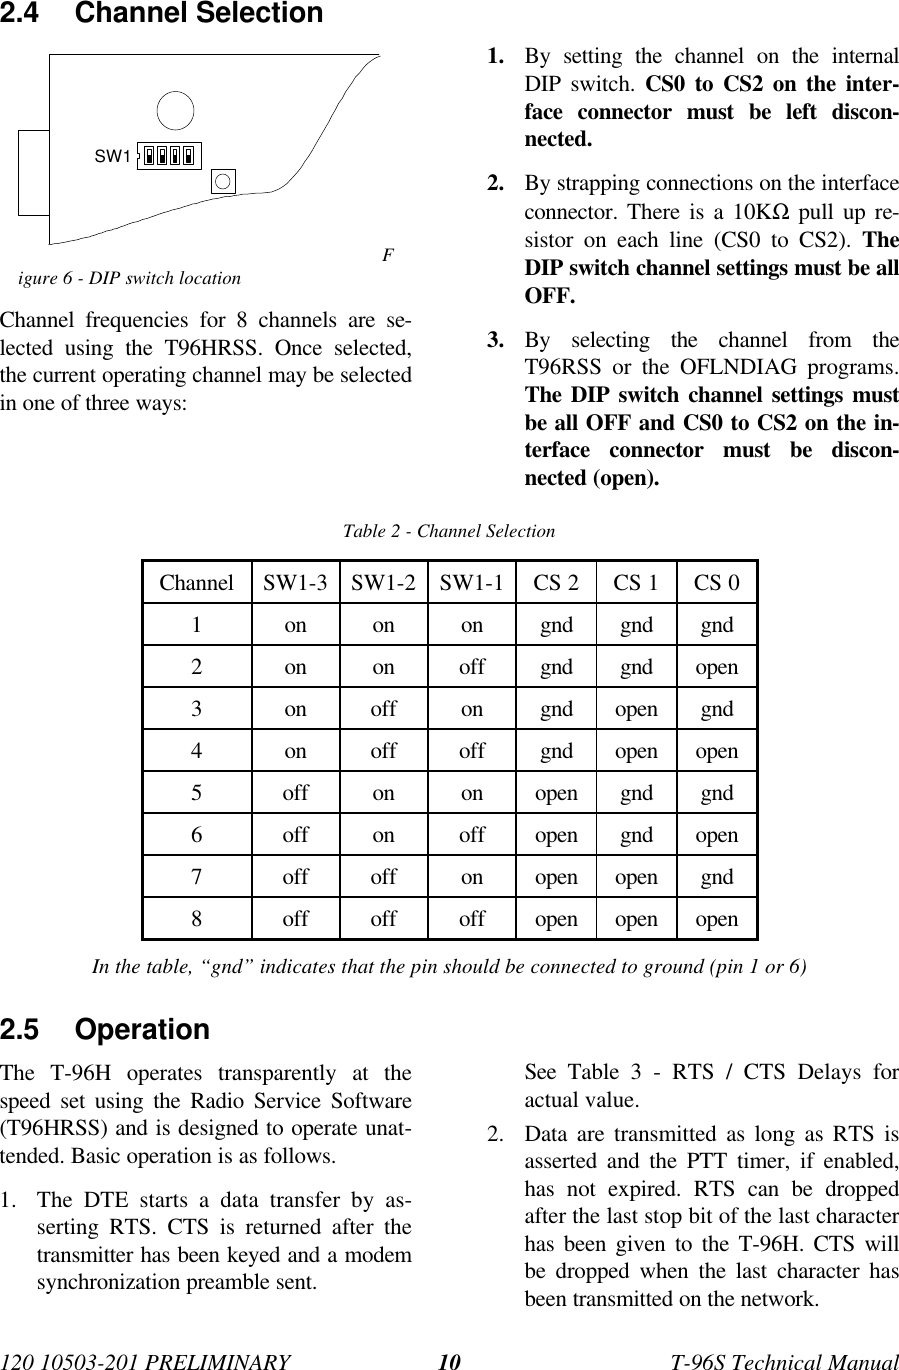 120 10503-201 PRELIMINARY T-96S Technical Manual102.4 Channel SelectionChannel frequencies for 8 channels are se-lected using the T96HRSS. Once selected,the current operating channel may be selectedin one of three ways:1. By setting the channel on the internalDIP switch. CS0 to CS2 on the inter-face connector must be left discon-nected.2. By strapping connections on the interfaceconnector. There is a 10KΩ pull up re-sistor on each line (CS0 to CS2). TheDIP switch channel settings must be allOFF.3. By selecting the channel from theT96RSS or the OFLNDIAG programs.The DIP switch channel settings mustbe all OFF and CS0 to CS2 on the in-terface connector must be discon-nected (open).Table 2 - Channel SelectionChannel SW1-3 SW1-2 SW1-1 CS 2 CS 1 CS 01on on on gnd gnd gnd2on on off gnd gnd open3on off on gnd open gnd4on off off gnd open open5off on on open gnd gnd6off on off open gnd open7off off on open open gnd8off off off open open openIn the table, “gnd” indicates that the pin should be connected to ground (pin 1 or 6)2.5 OperationThe T-96H operates transparently at thespeed set using the Radio Service Software(T96HRSS) and is designed to operate unat-tended. Basic operation is as follows.1. The DTE starts a data transfer by as-serting RTS. CTS is returned after thetransmitter has been keyed and a modemsynchronization preamble sent.See Table 3 - RTS / CTS Delays foractual value.2. Data are transmitted as long as RTS isasserted and the PTT timer, if enabled,has not expired. RTS can be droppedafter the last stop bit of the last characterhas been given to the T-96H. CTS willbe dropped when the last character hasbeen transmitted on the network.SW1Figure 6 - DIP switch location